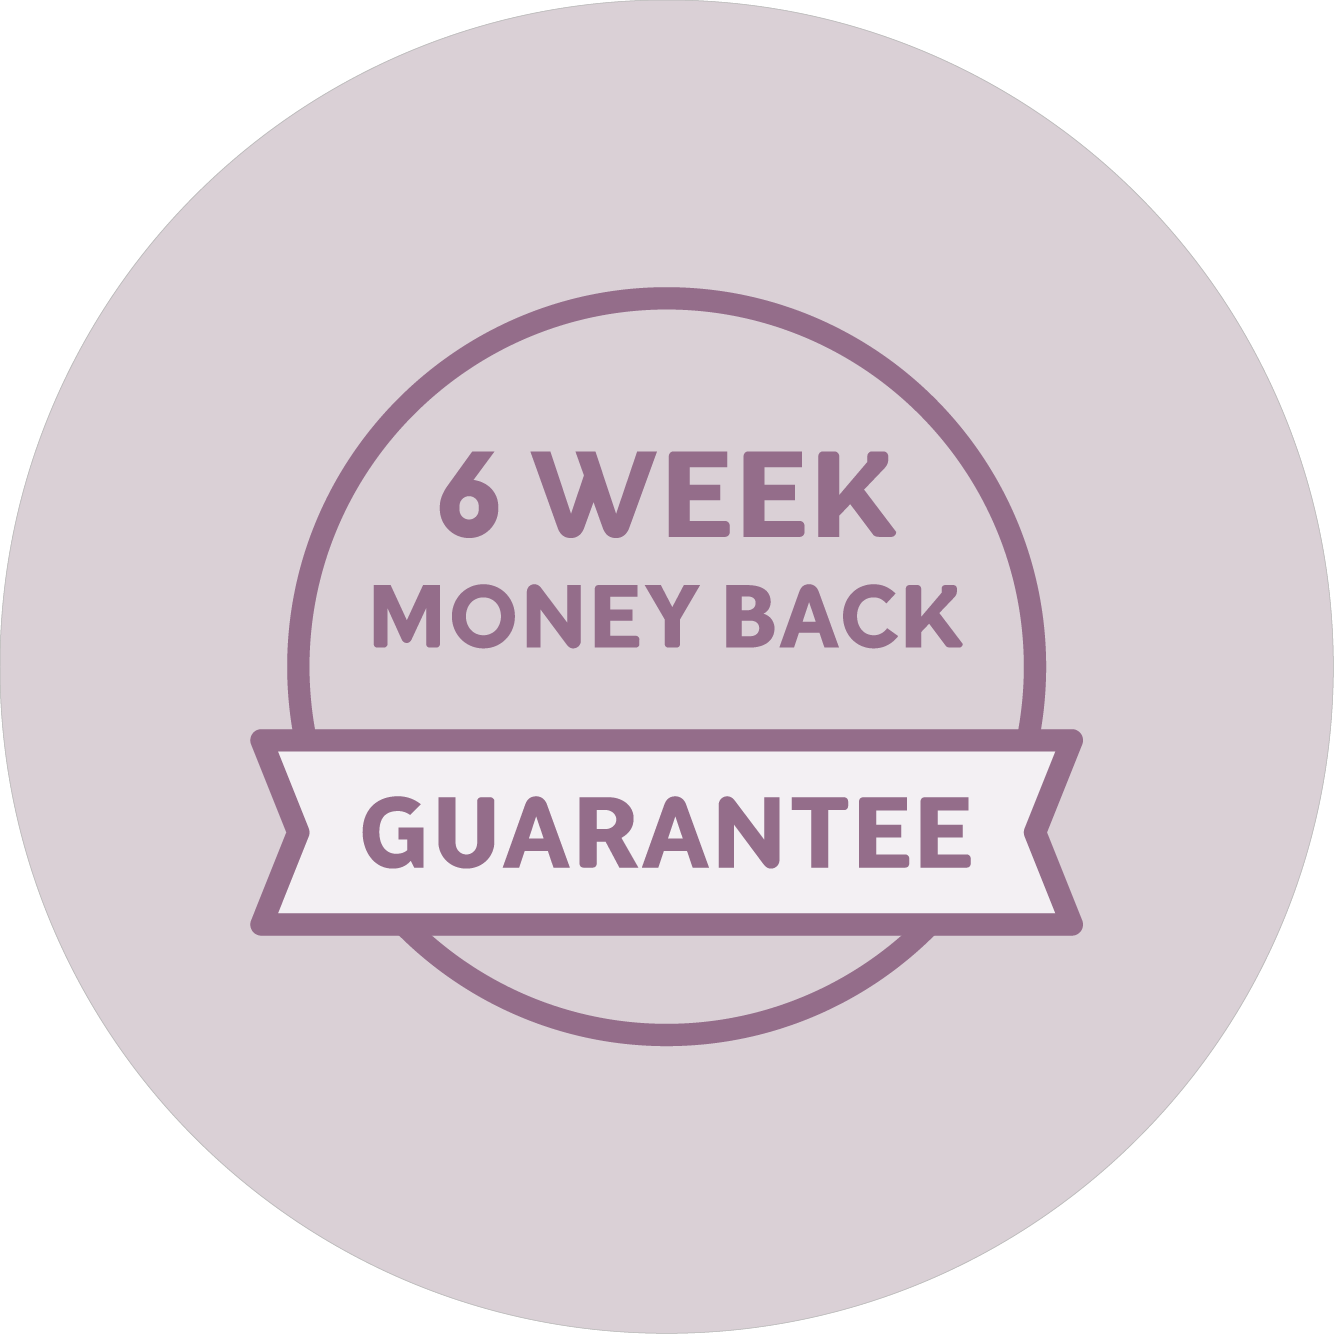 A graphic of a stylized badge with the text "6 WEEK MONEY BACK GUARANTEE" on a circular purple background.